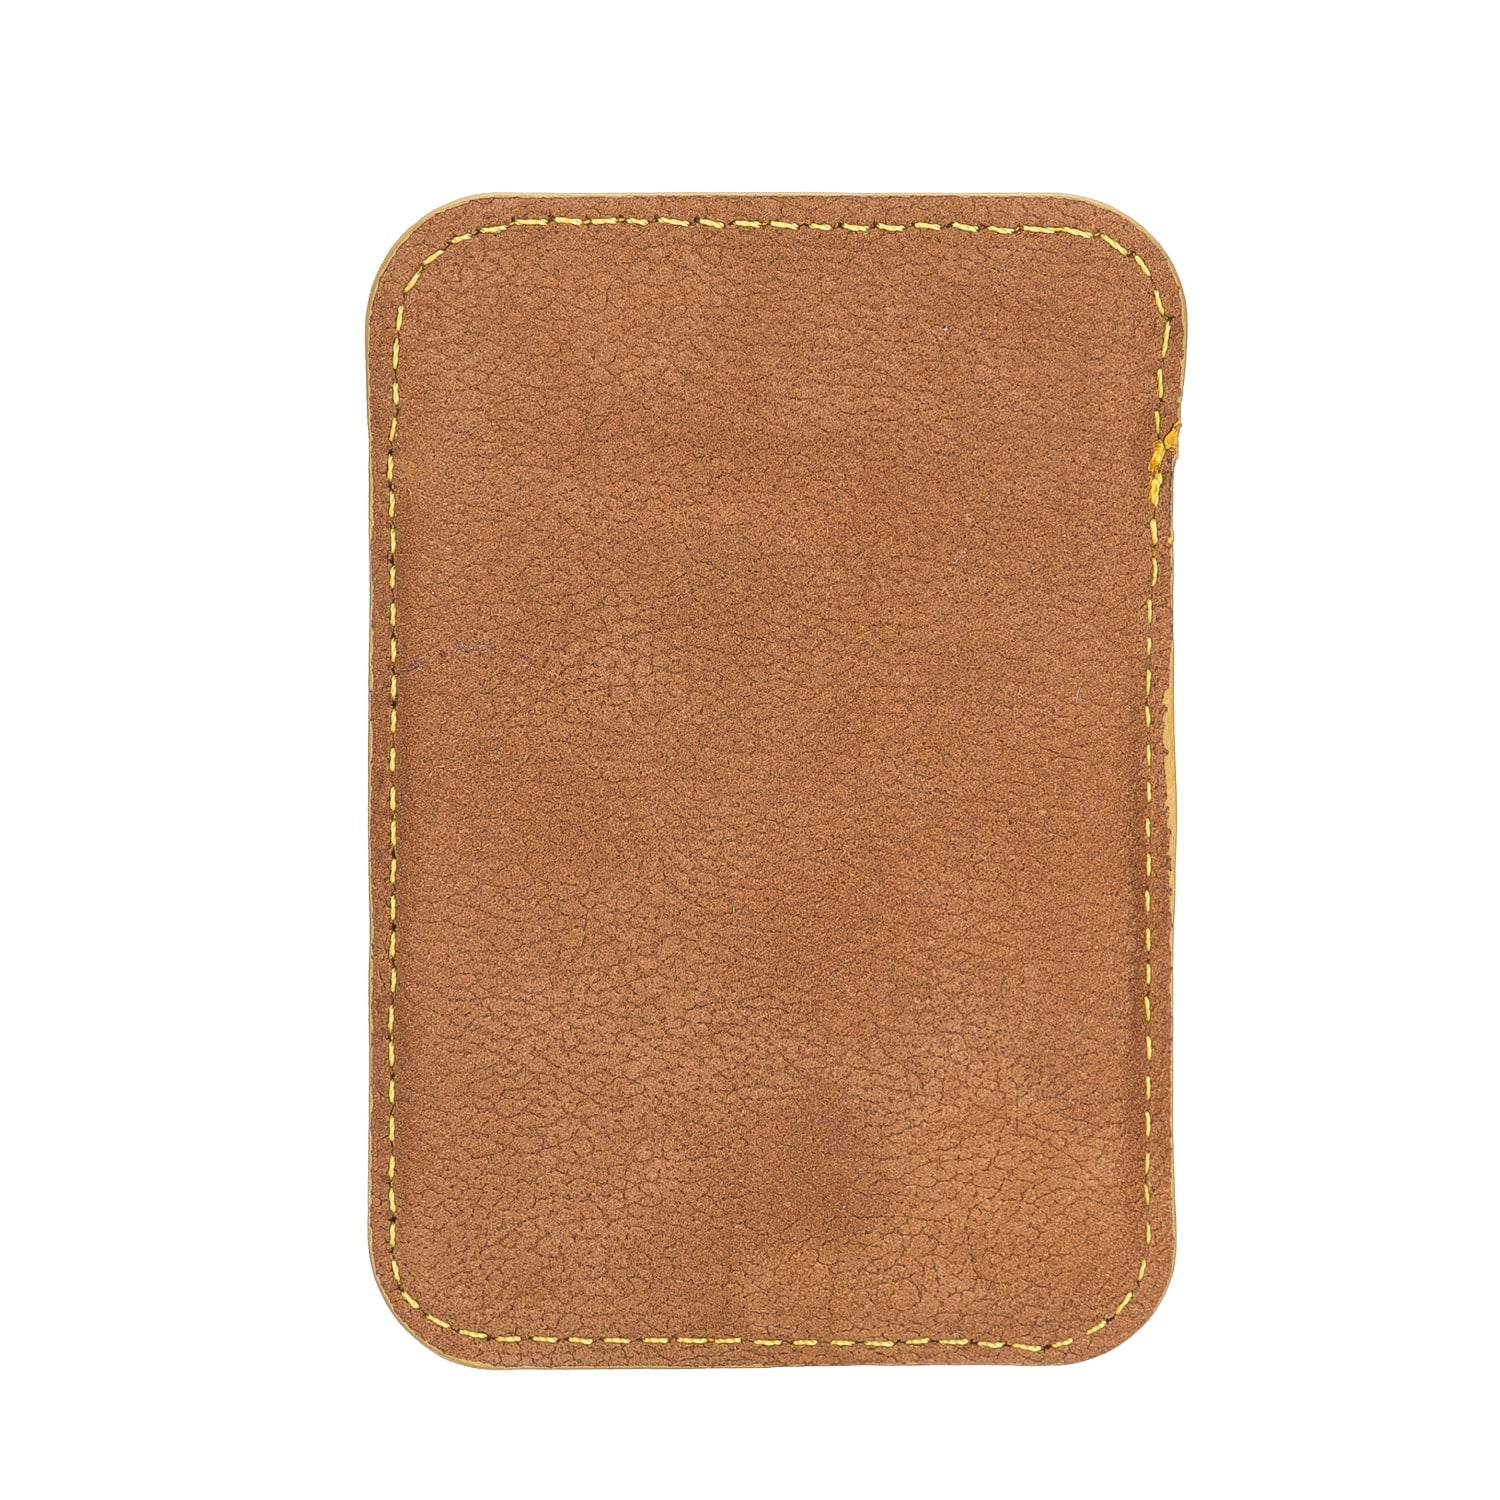 Golden Brown Leather Apple MagSafe Card Holder Magnetic Wallet for iPhone - Bomonti - 7